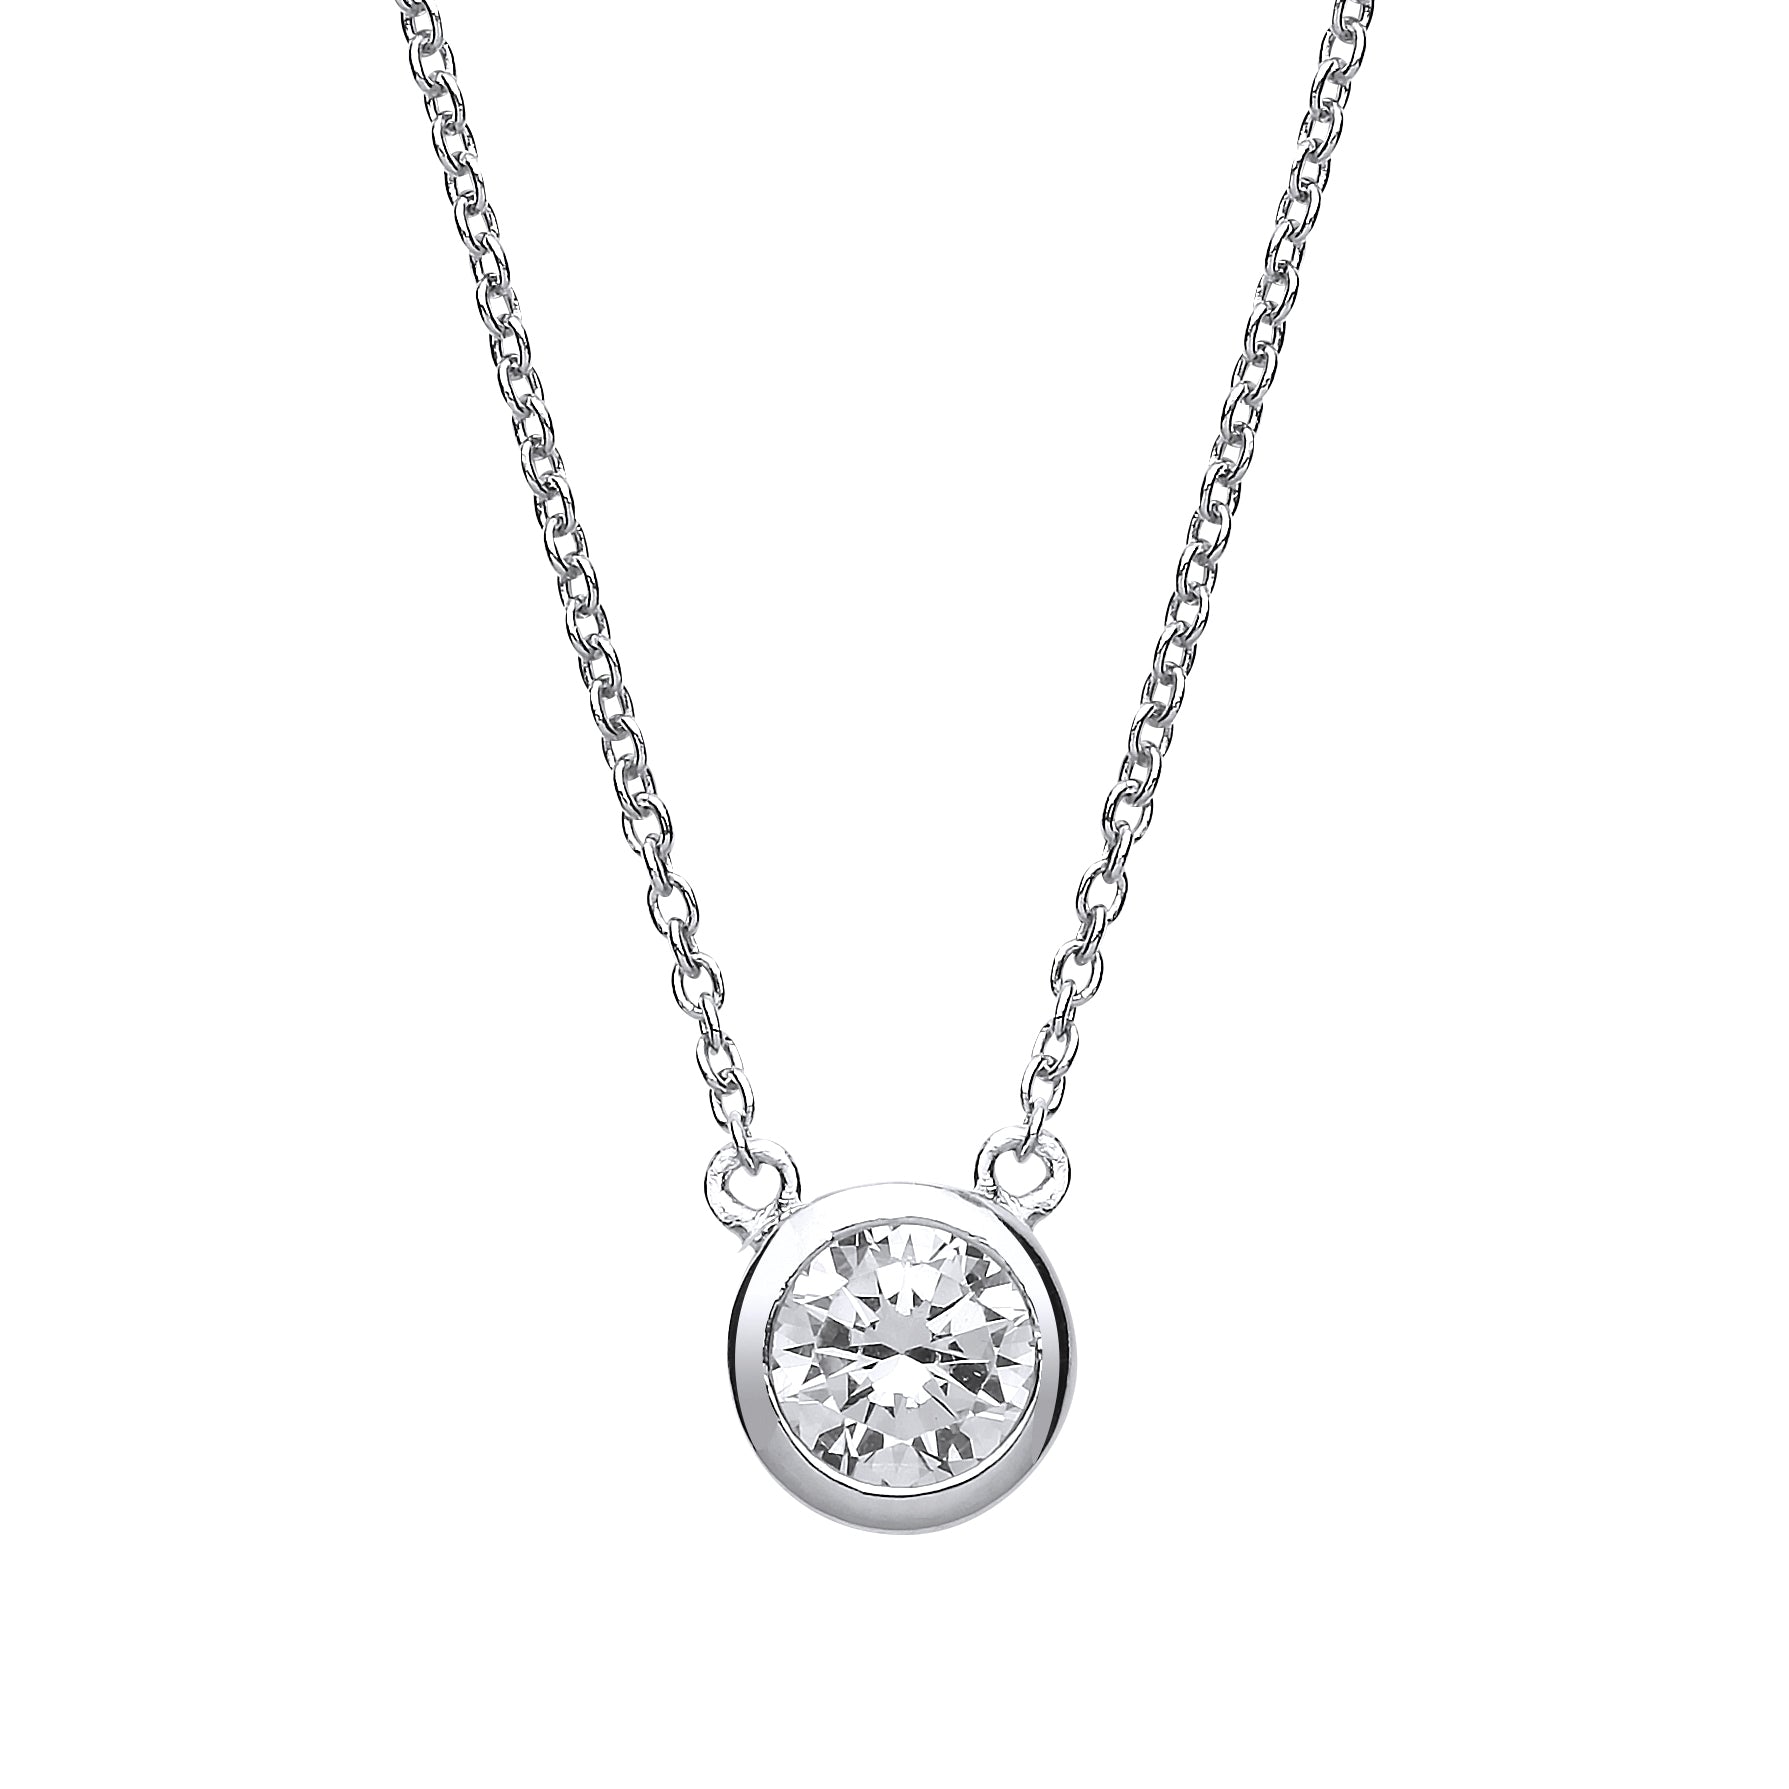 Silver  CZ Donut Solitaire Charm Necklace 16 + 2 inch - GVK163